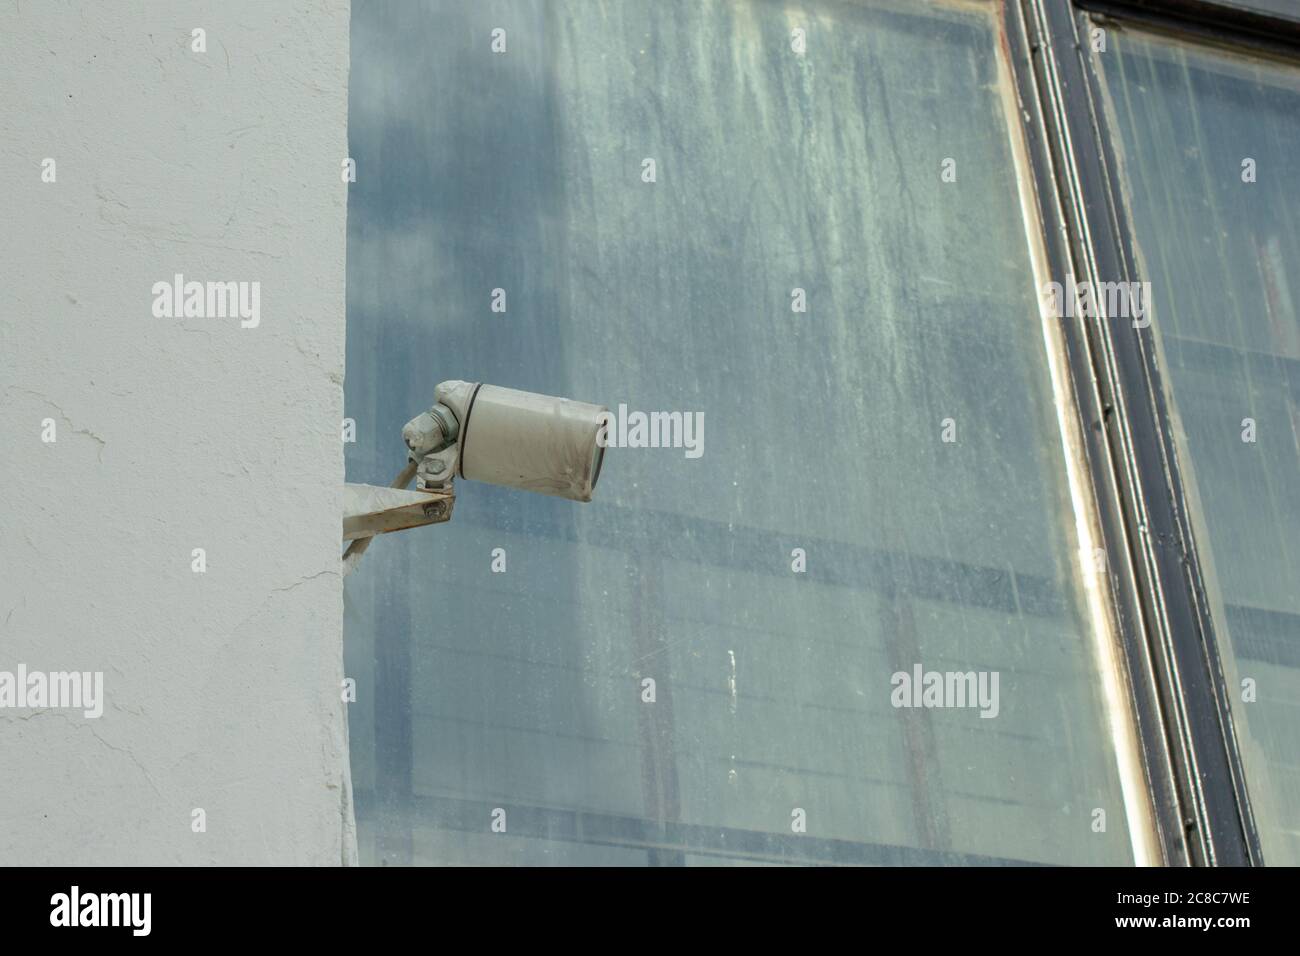 CCTV security camera on building wall outdoor. Urban street view Stock Photo